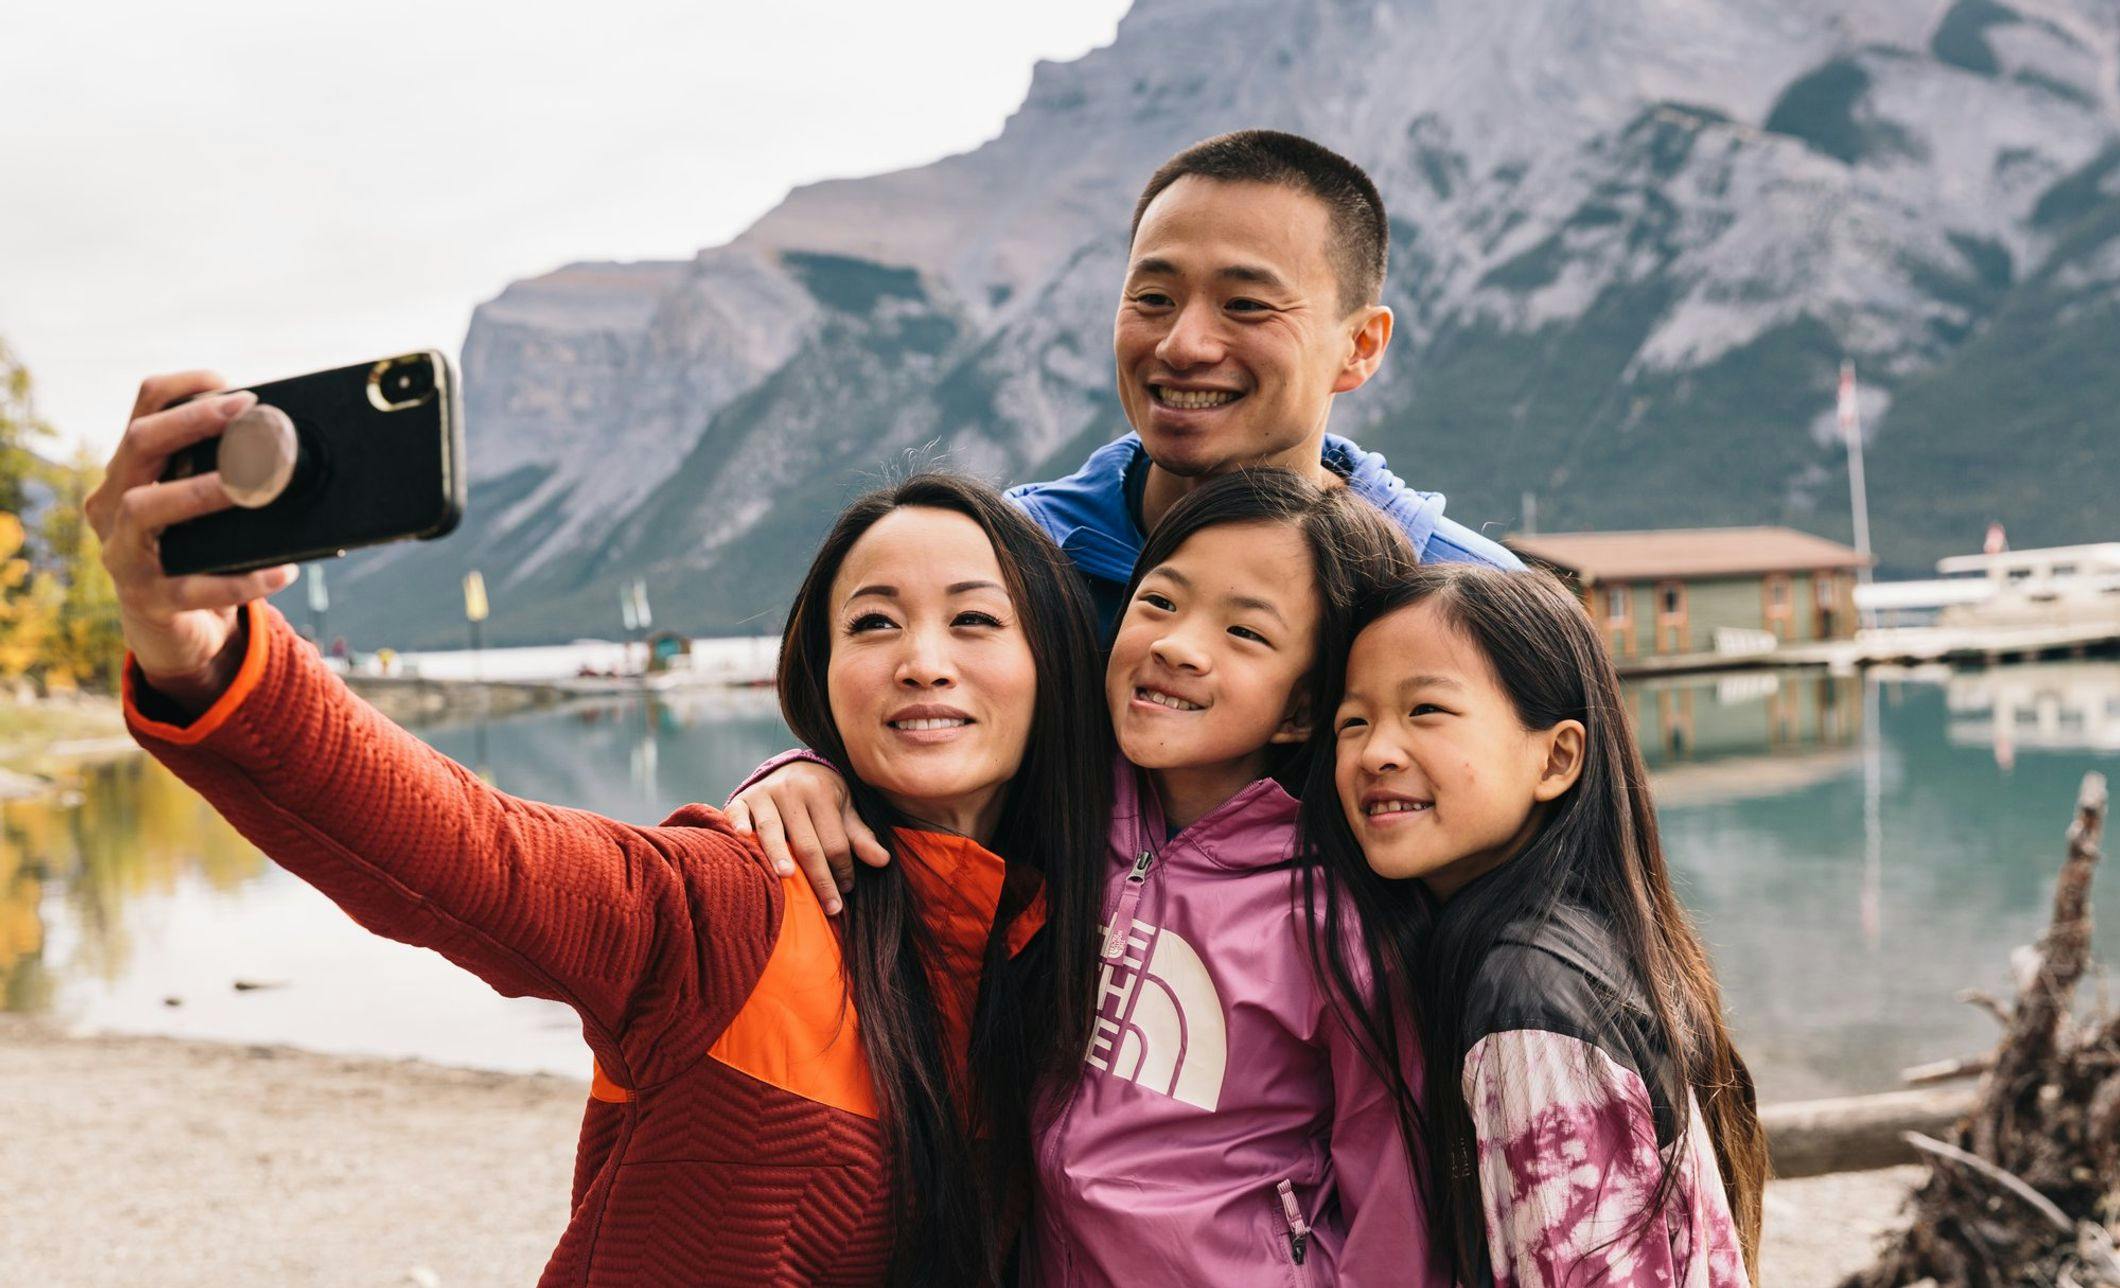 A family of four stops to take a selfie in front of a turquoise blue lake while dressed for time in the outdoors